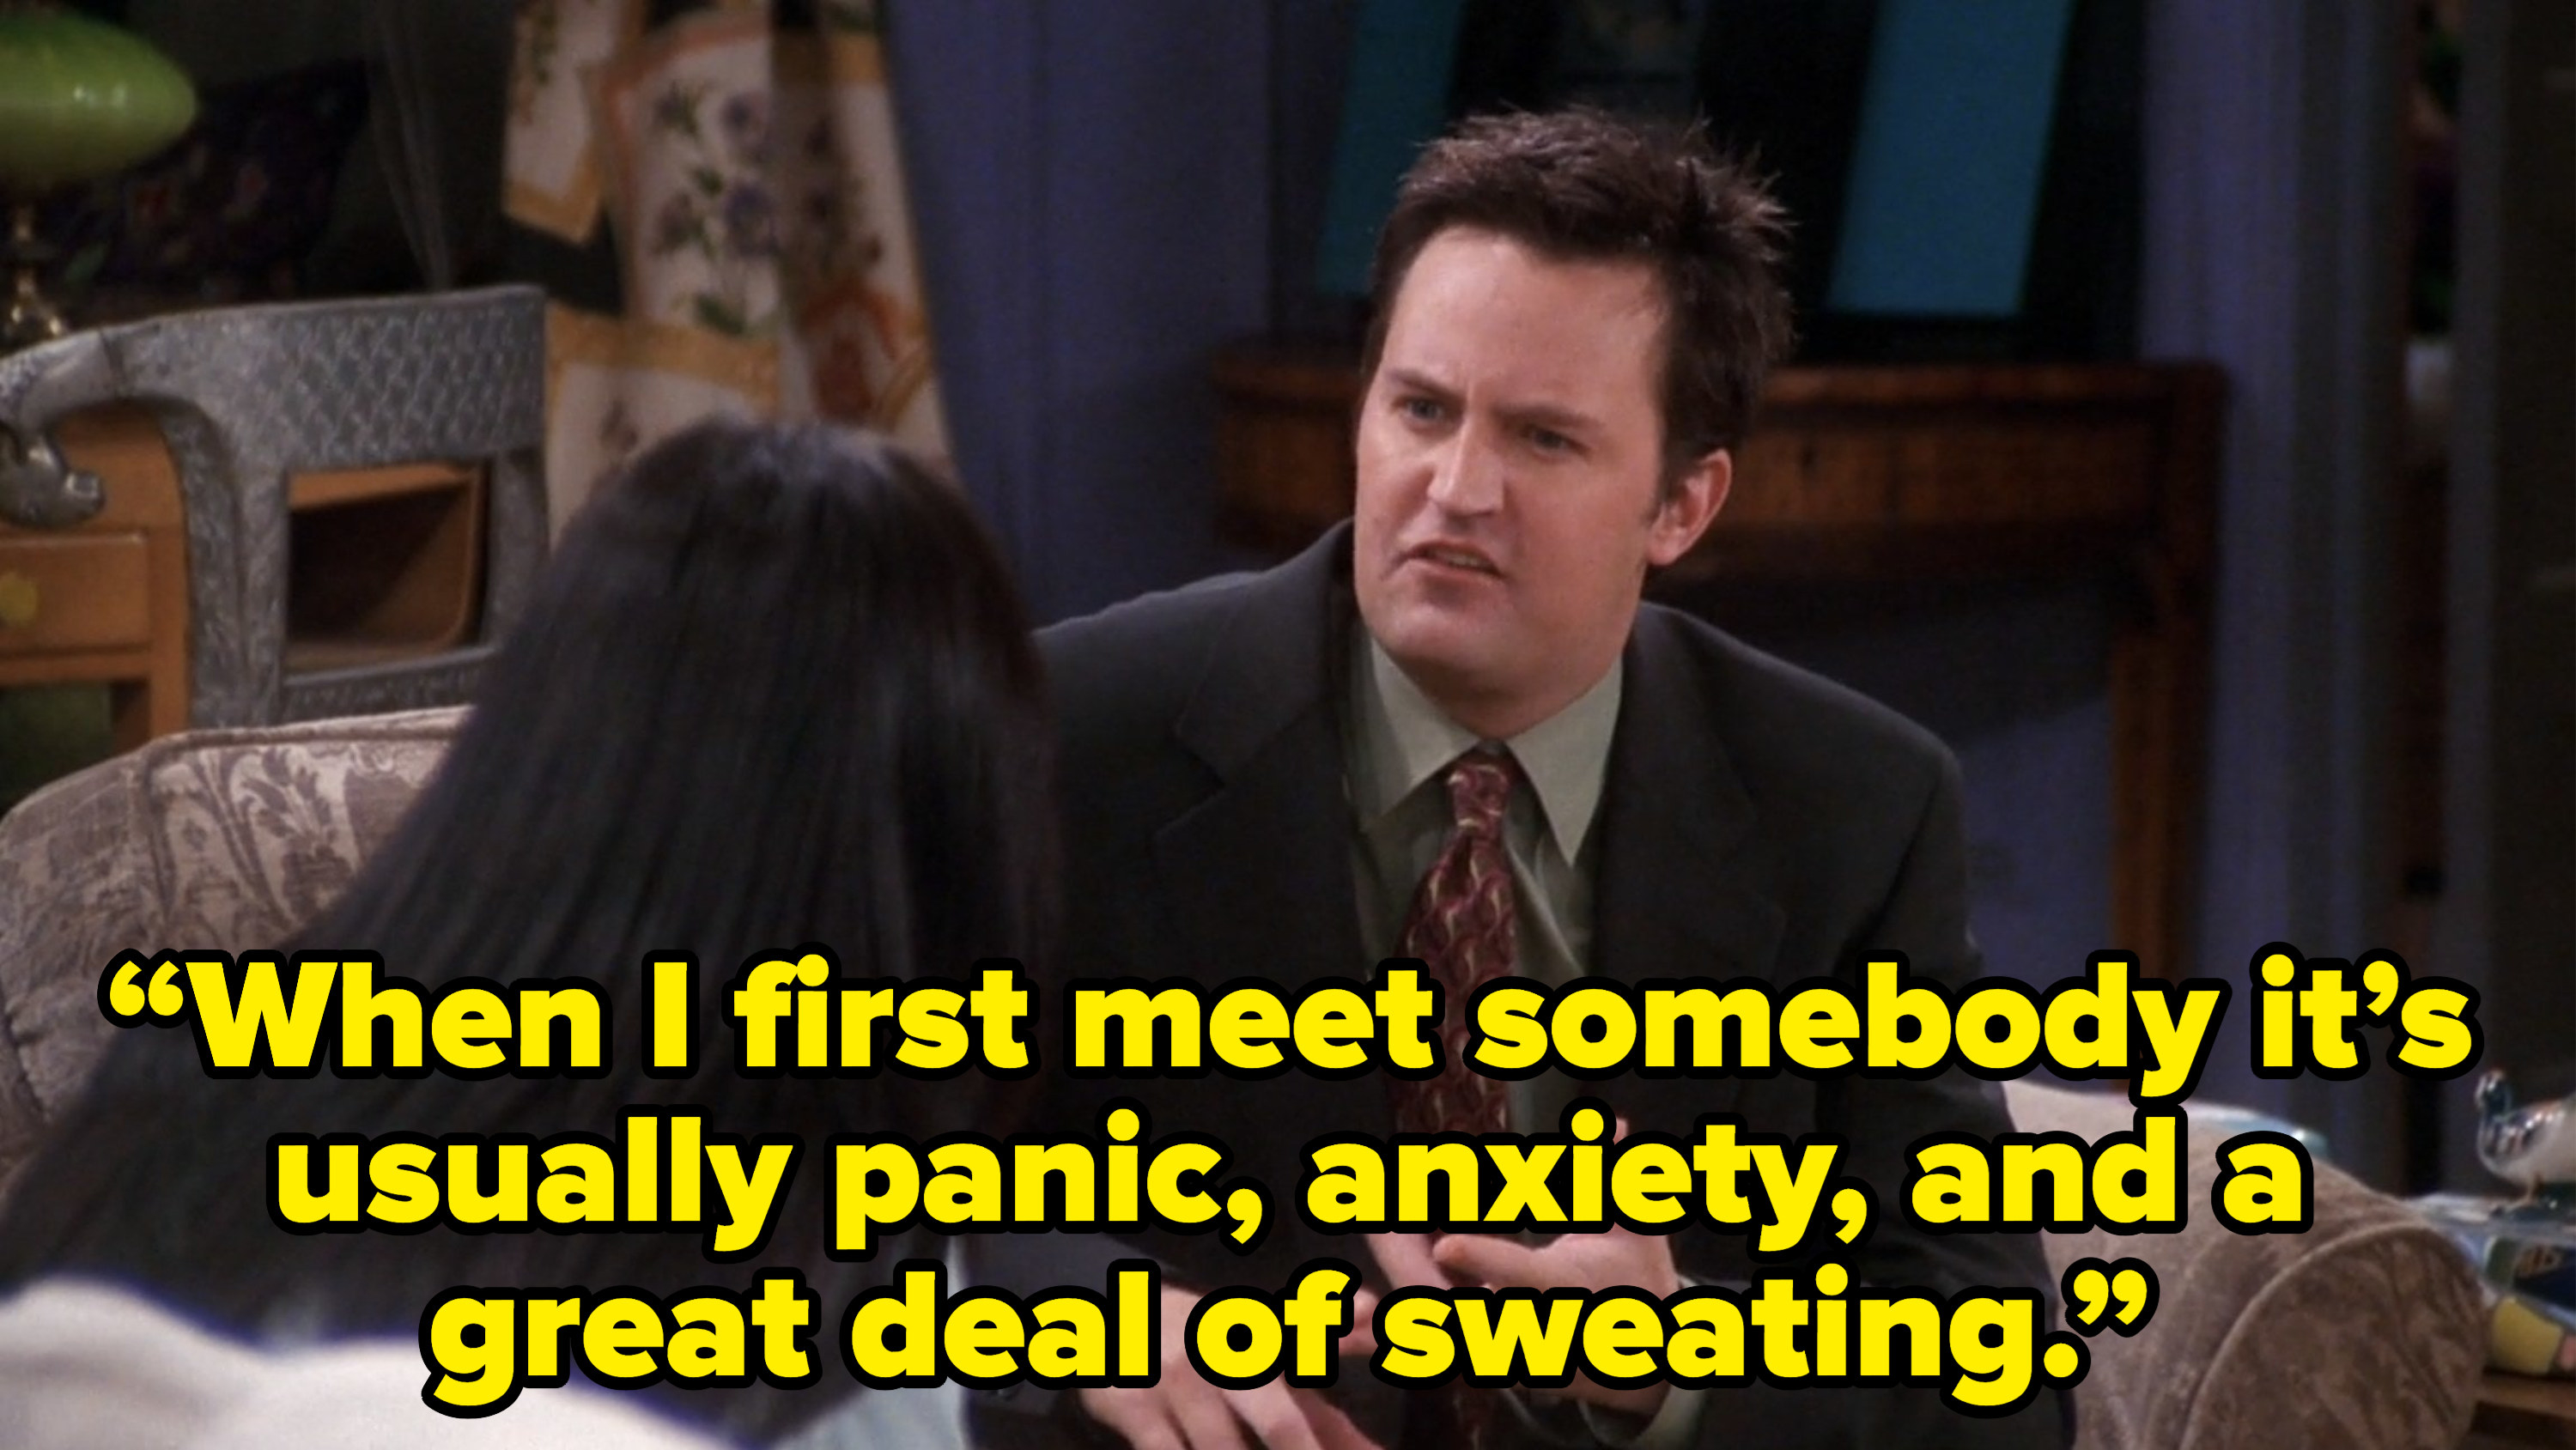 chandler telling monica “When I first meet somebody it’s usually panic, anxiety, and a great deal of sweating.” on friends